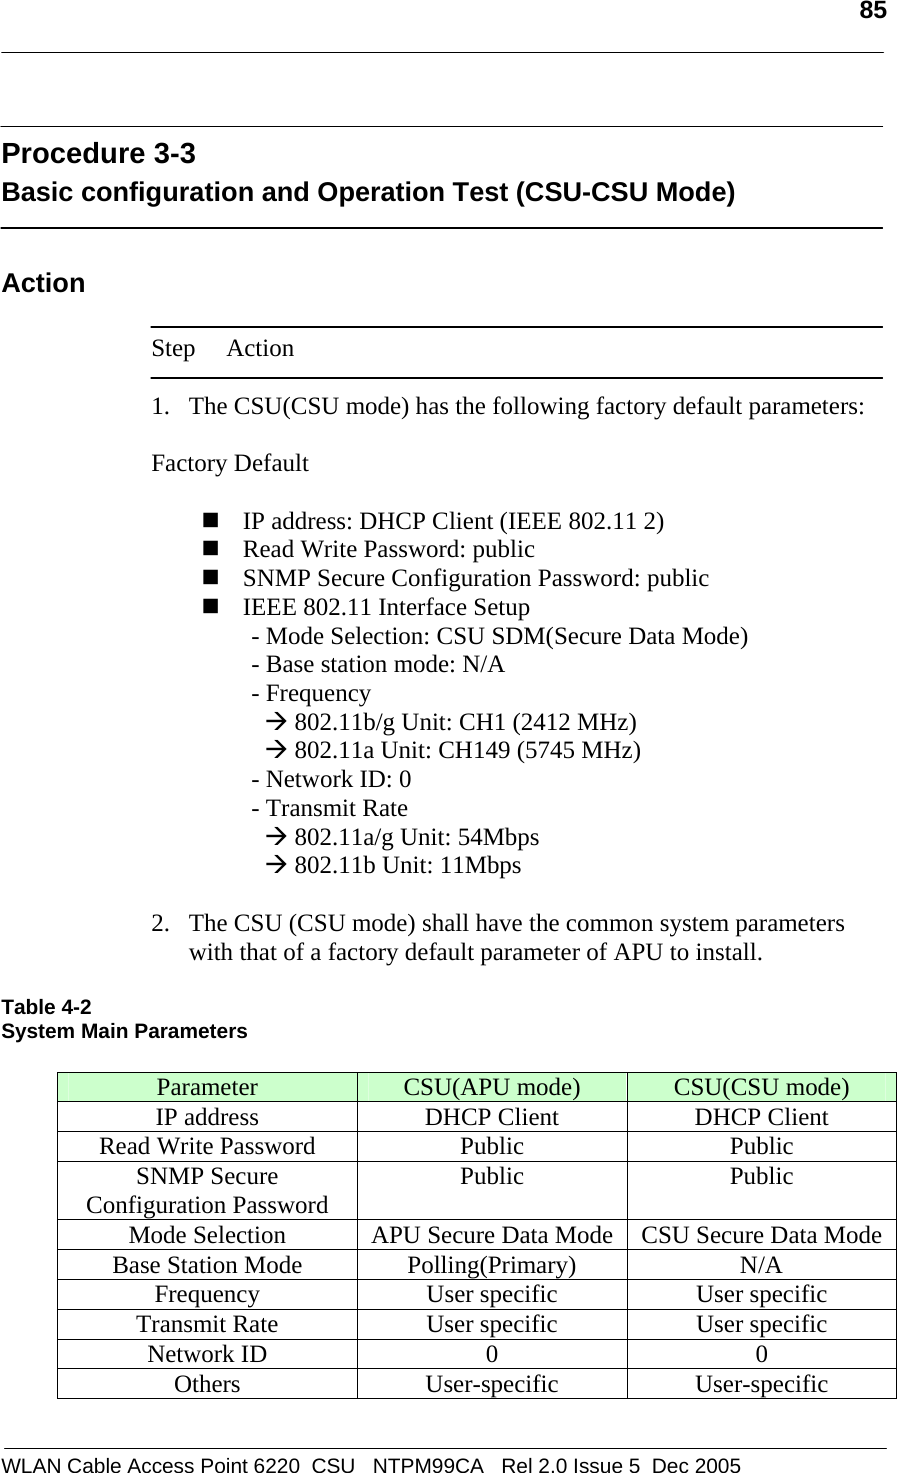   85  WLAN Cable Access Point 6220  CSU   NTPM99CA   Rel 2.0 Issue 5  Dec 2005  Procedure 3-3 Basic configuration and Operation Test (CSU-CSU Mode)  Action  Step Action  1. The CSU(CSU mode) has the following factory default parameters:  Factory Default   IP address: DHCP Client (IEEE 802.11 2)  Read Write Password: public  SNMP Secure Configuration Password: public  IEEE 802.11 Interface Setup - Mode Selection: CSU SDM(Secure Data Mode)  - Base station mode: N/A             - Frequency Æ 802.11b/g Unit: CH1 (2412 MHz)  Æ 802.11a Unit: CH149 (5745 MHz)              - Network ID: 0 - Transmit Rate Æ 802.11a/g Unit: 54Mbps Æ 802.11b Unit: 11Mbps  2. The CSU (CSU mode) shall have the common system parameters with that of a factory default parameter of APU to install.   Table 4-2 System Main Parameters  Parameter  CSU(APU mode)  CSU(CSU mode) IP address  DHCP Client  DHCP Client Read Write Password  Public  Public SNMP Secure Configuration Password  Public Public Mode Selection  APU Secure Data Mode CSU Secure Data ModeBase Station Mode  Polling(Primary)  N/A Frequency  User specific  User specific Transmit Rate  User specific  User specific Network ID  0  0 Others User-specific User-specific  